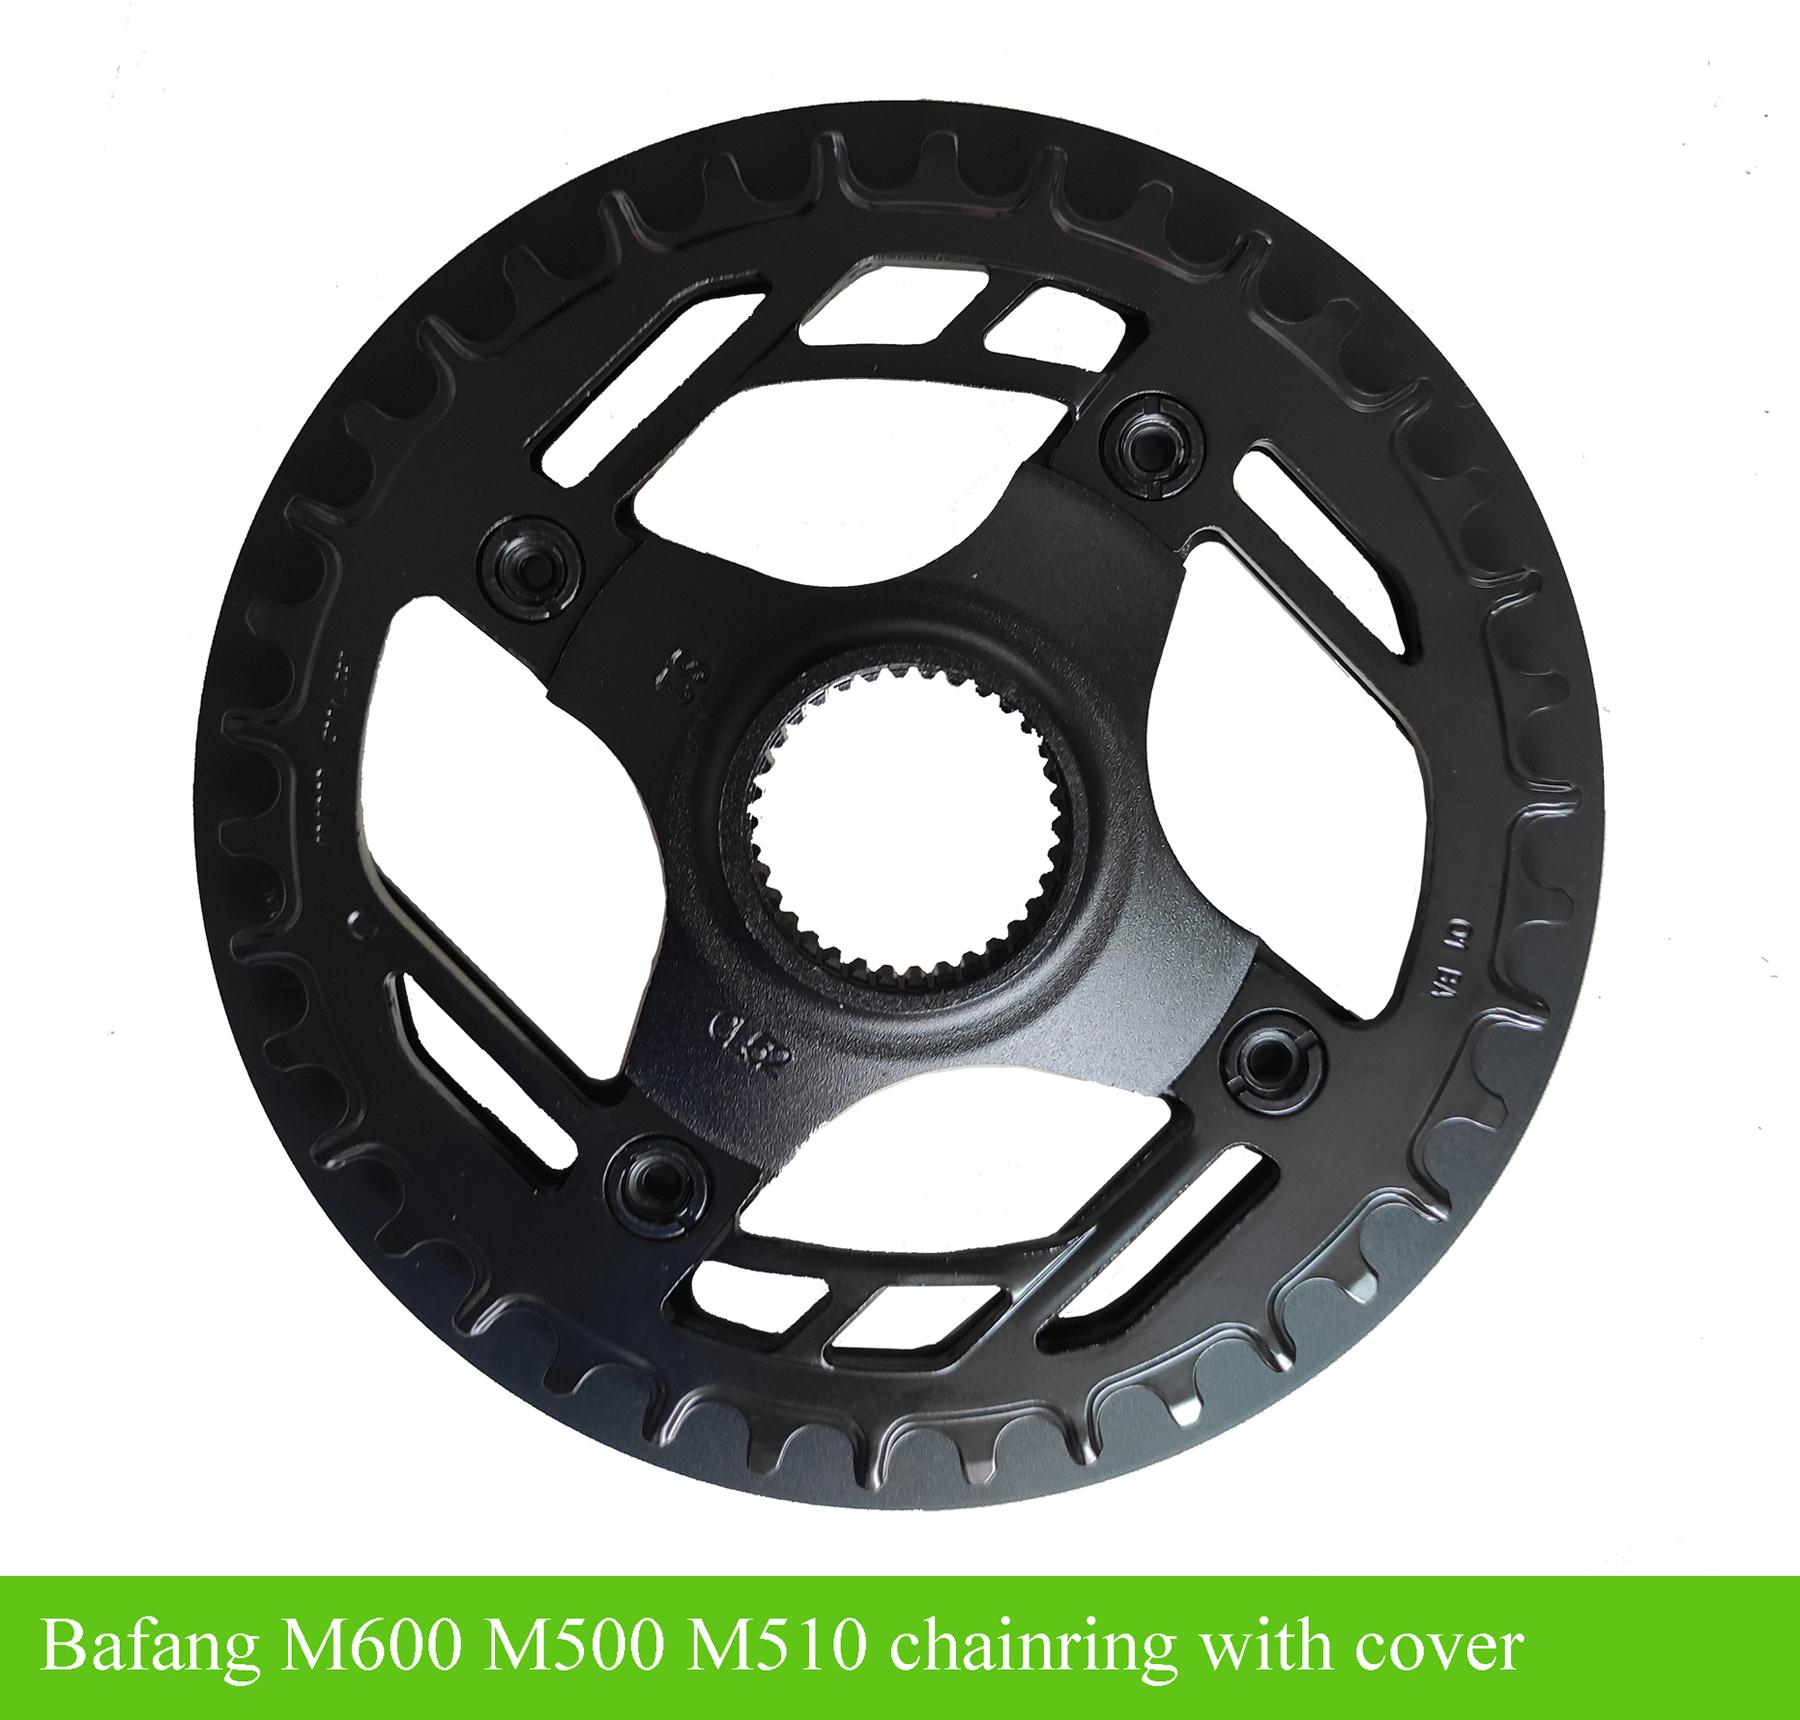 Bafang M600 M500 M510 mid motor chainring - BBS, ebike  batteries, Bafang M620, Bafang M600, Bafang M500, Bafang M510, KT  controller with display